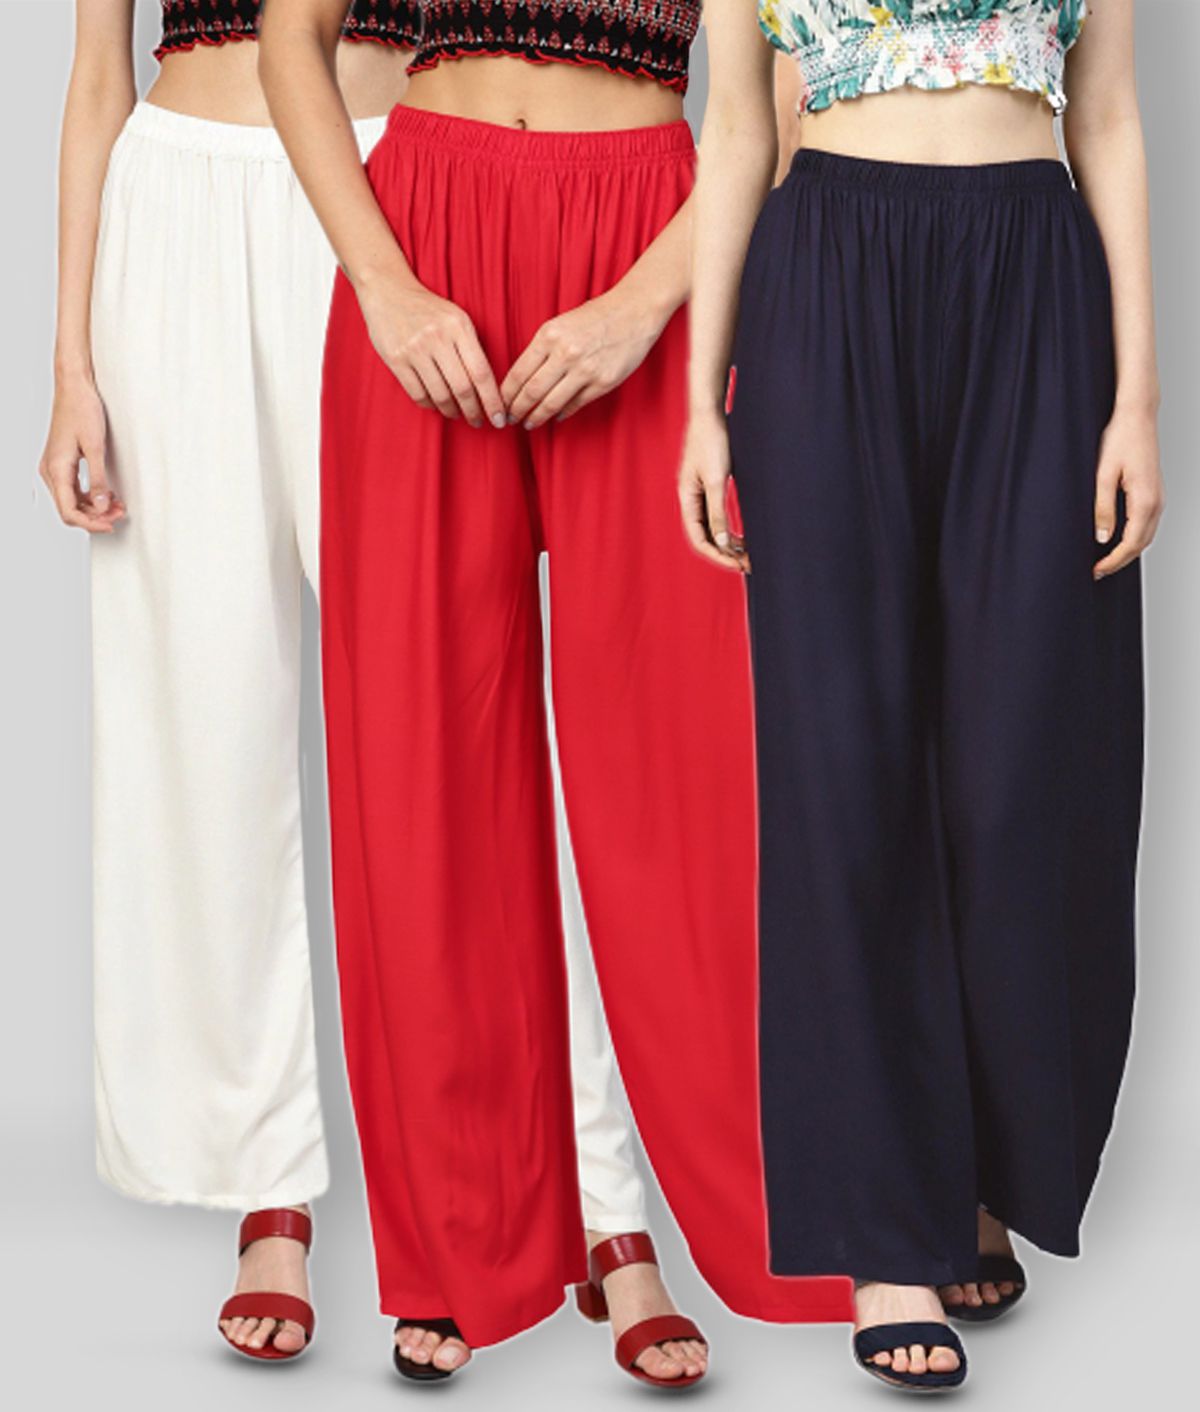     			R L F - Multicolor Rayon Flared Women's Palazzos ( Pack of 3 )